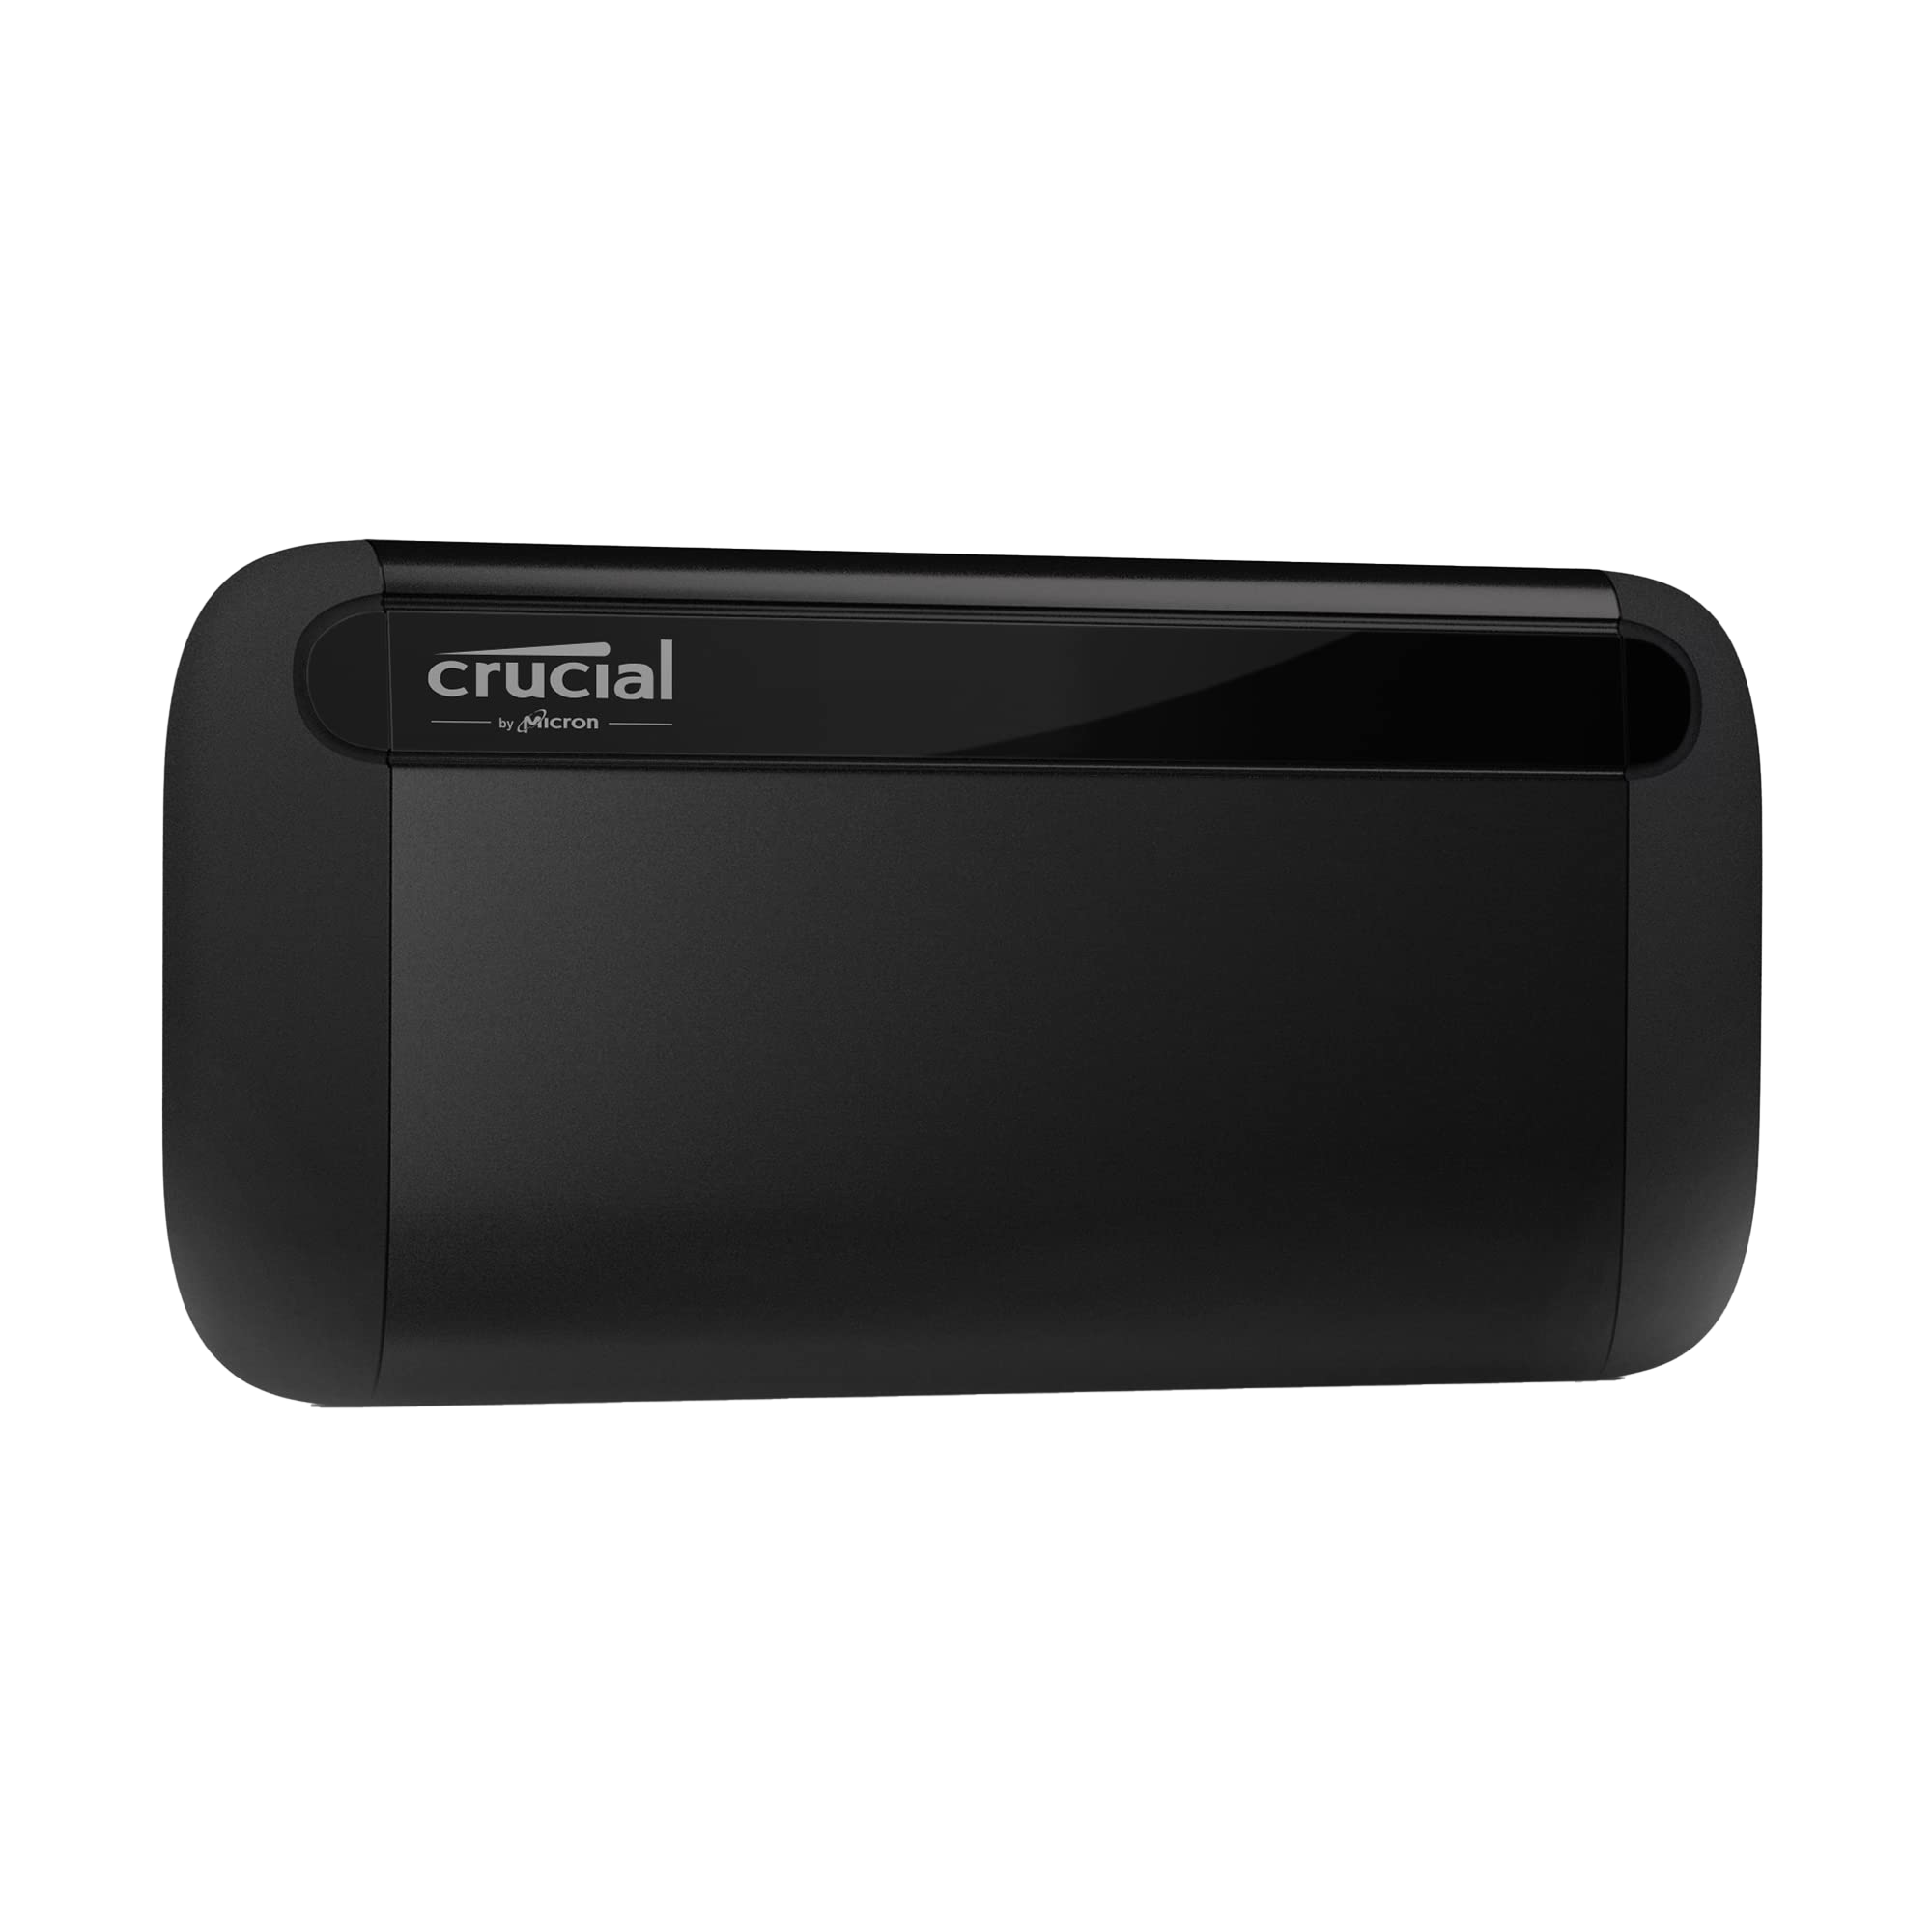 Crucial X8 portable SSD